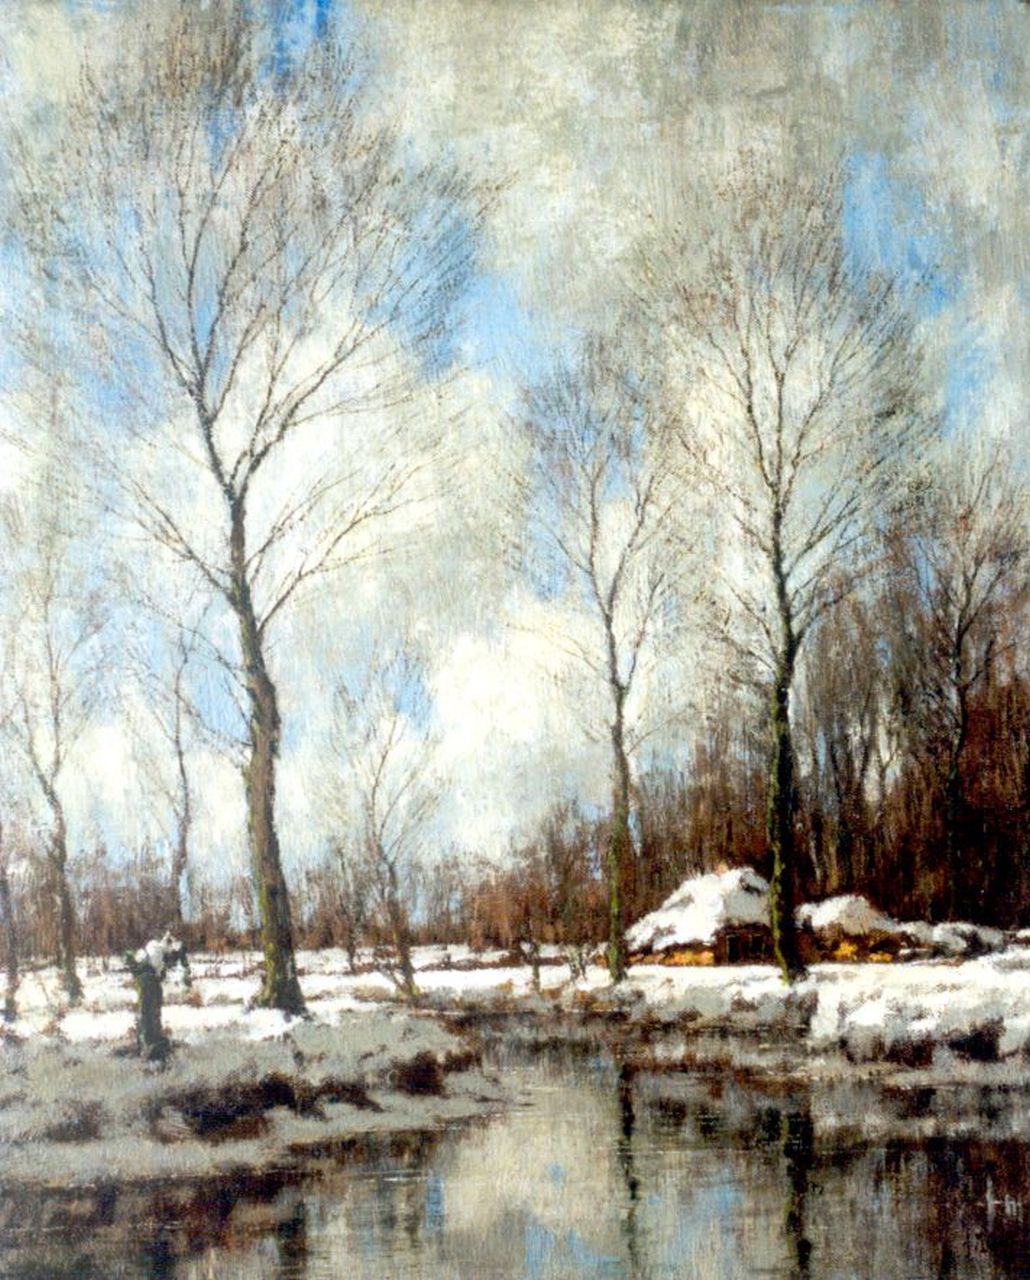 Gorter A.M.  | 'Arnold' Marc Gorter, Winter landscape with the Vordense beek (counterpart of inventory number 6001), oil on canvas 56.5 x 46.5 cm, signed l.r.